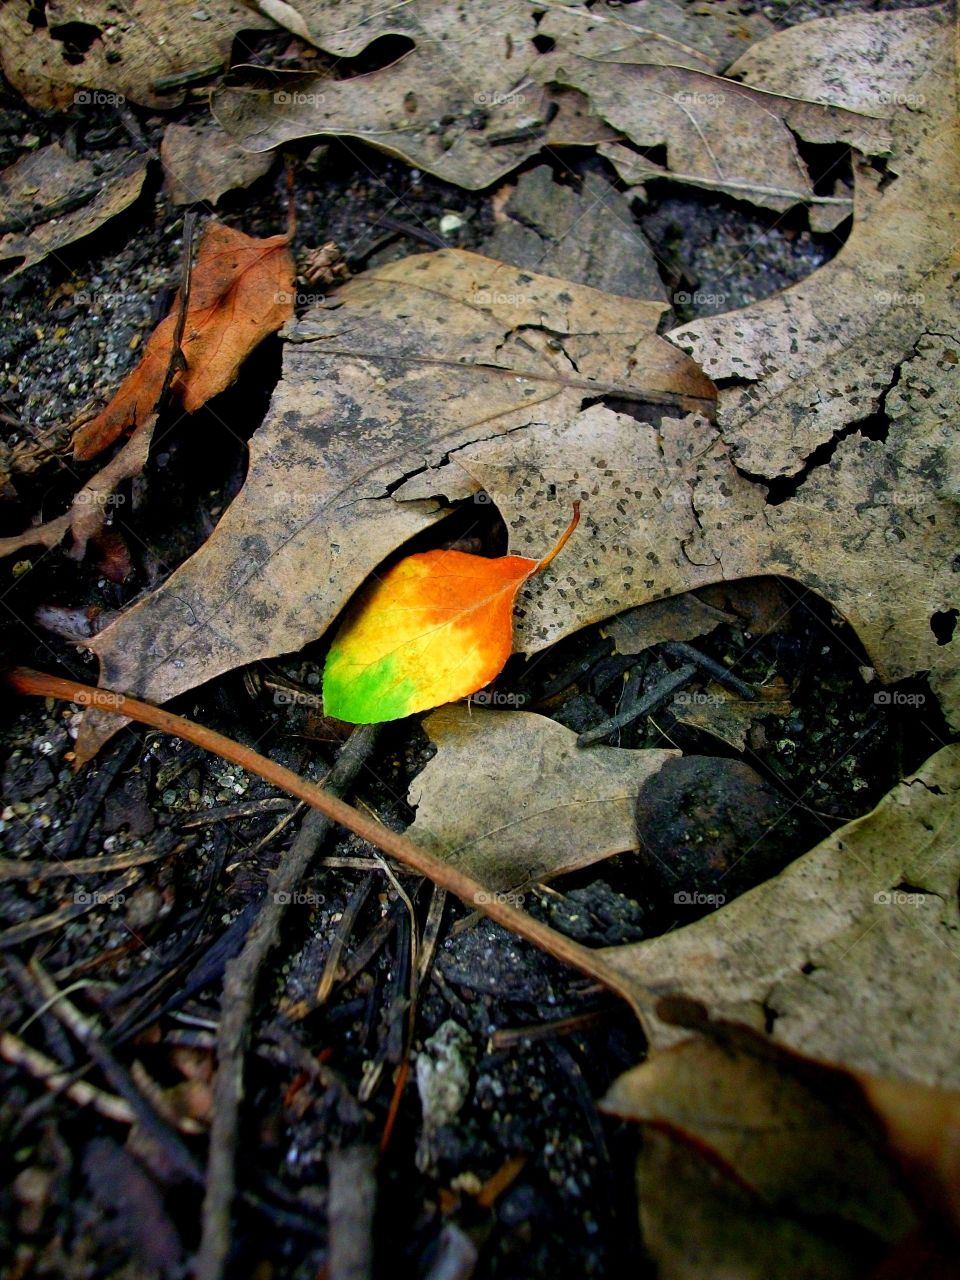 Lone Leaf - In Contrast Mission